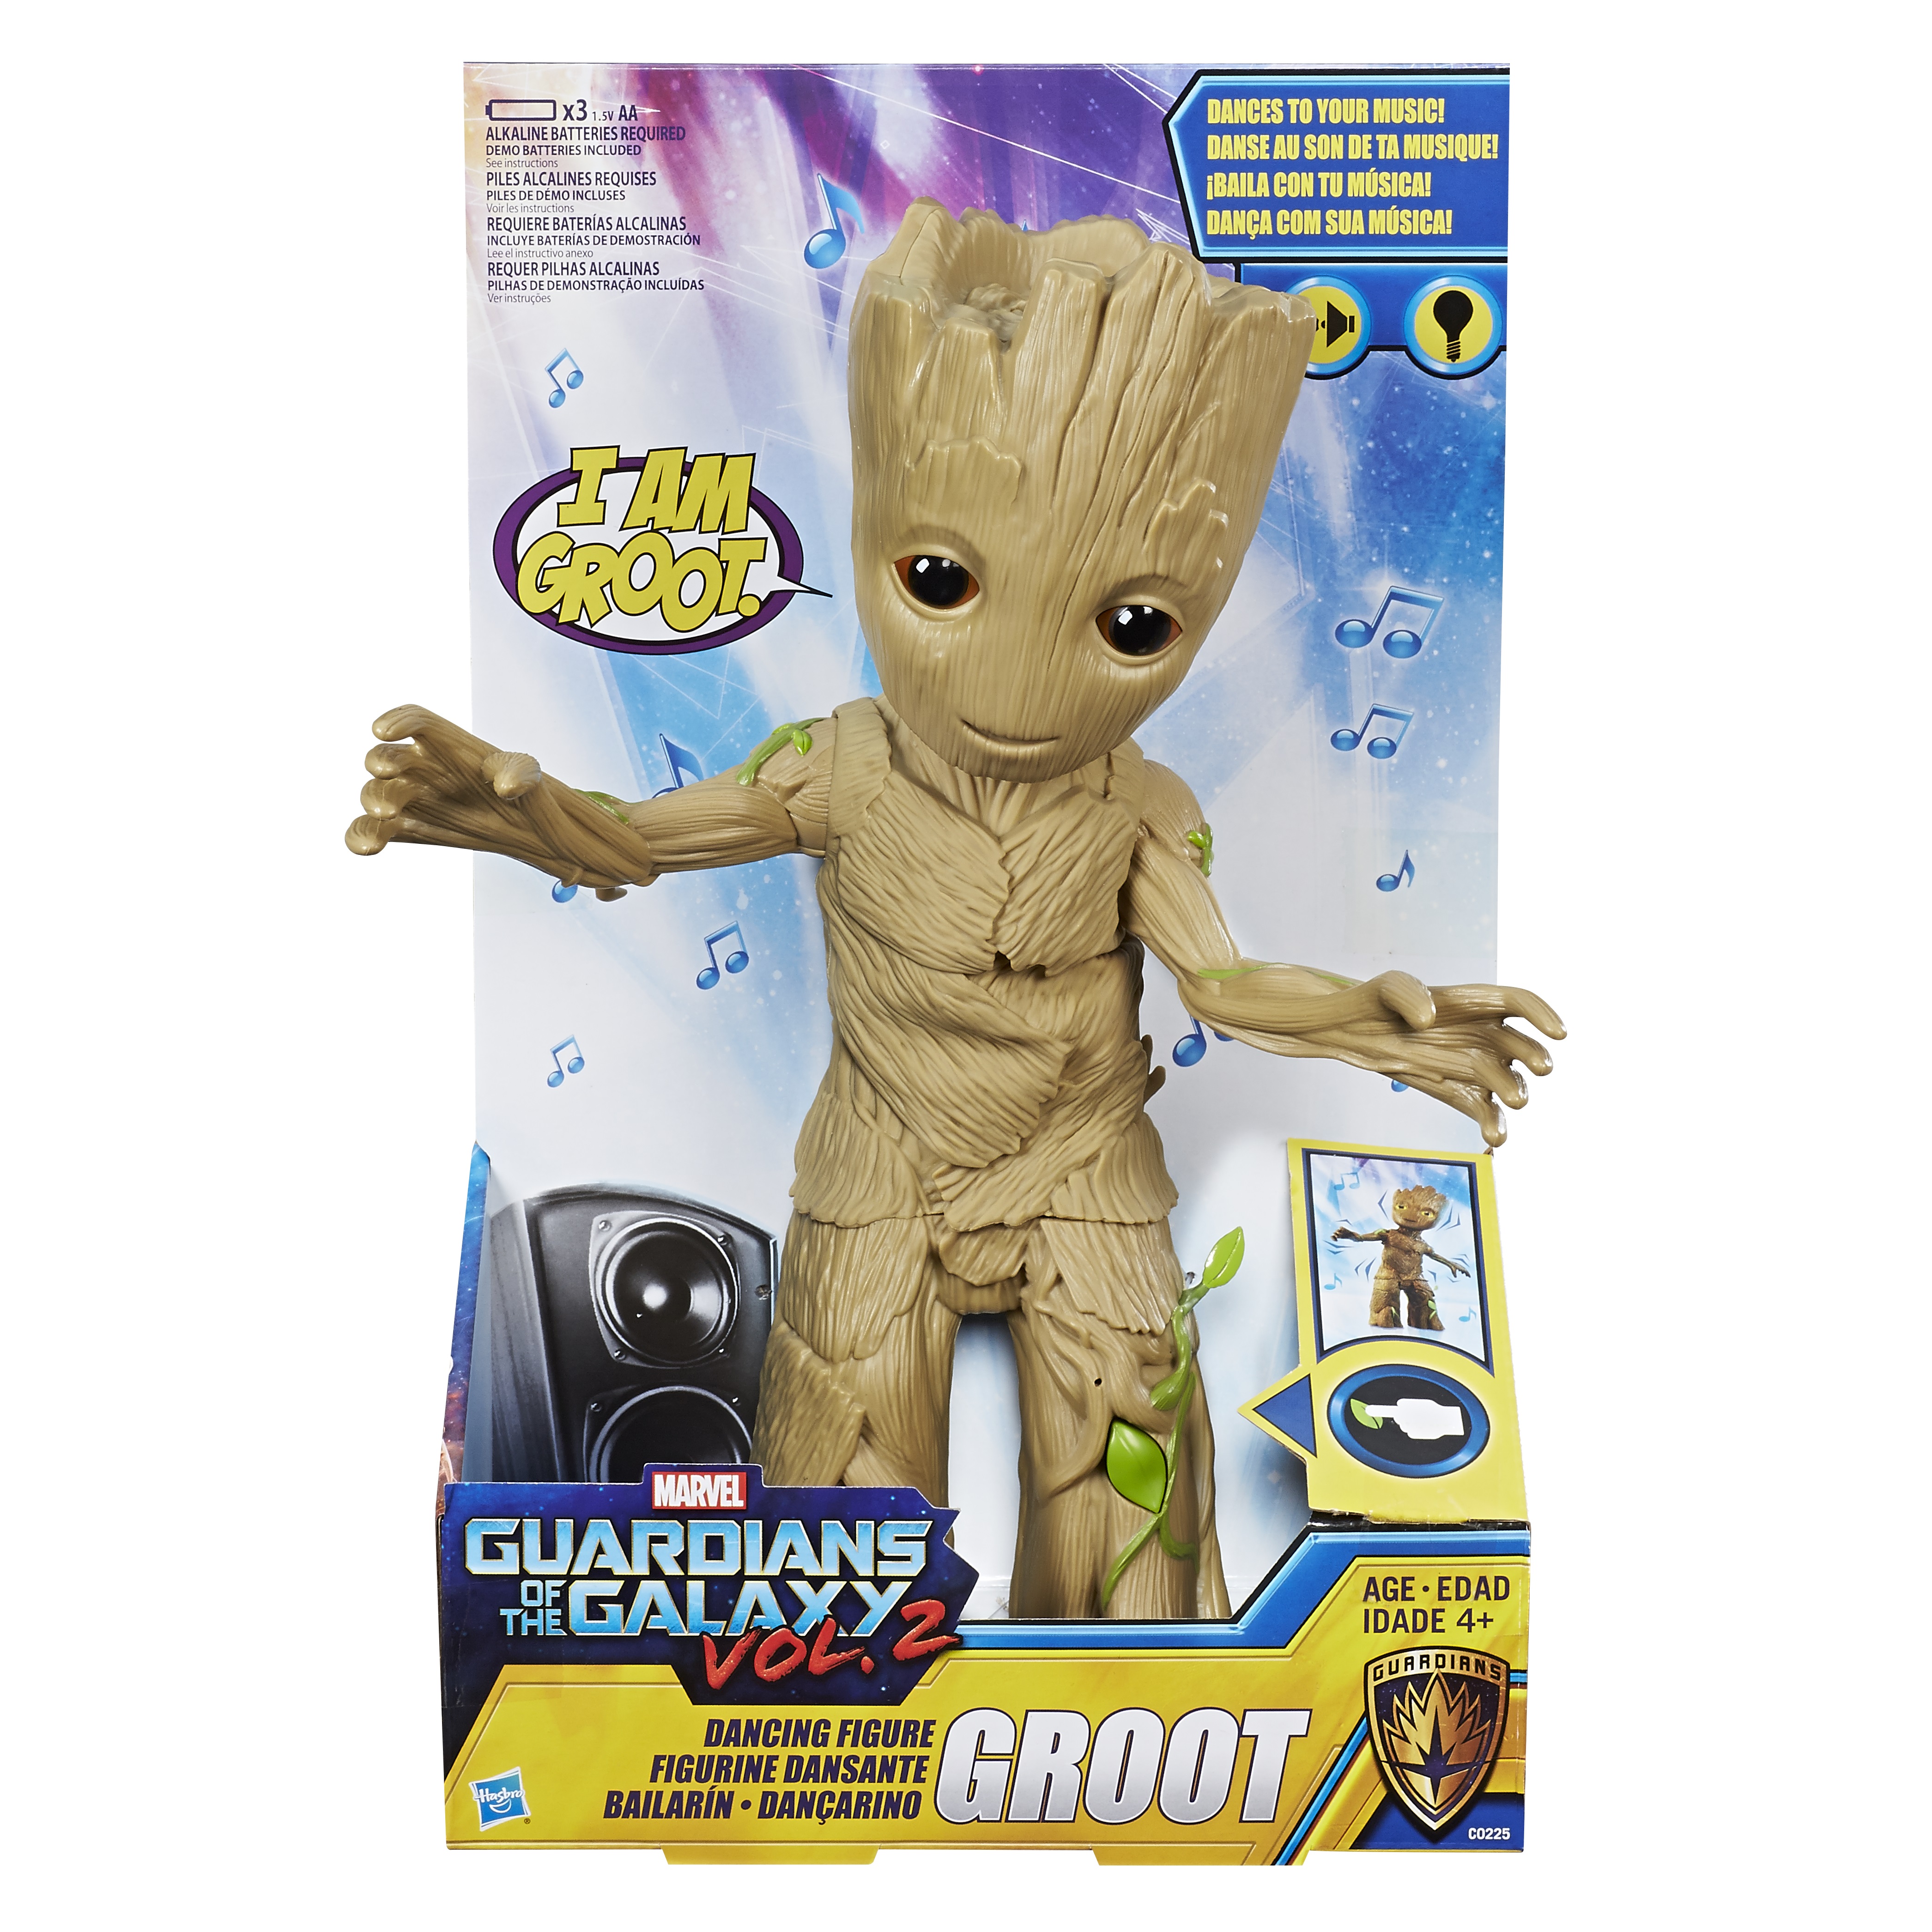 https://www.laughingplace.com/w/wp-content/uploads/2017/02/MARVEL-GUARDIANS-OF-THE-GALAXY-VOL.-2-DANCING-GROOT-Figure-in-pkg.jpg